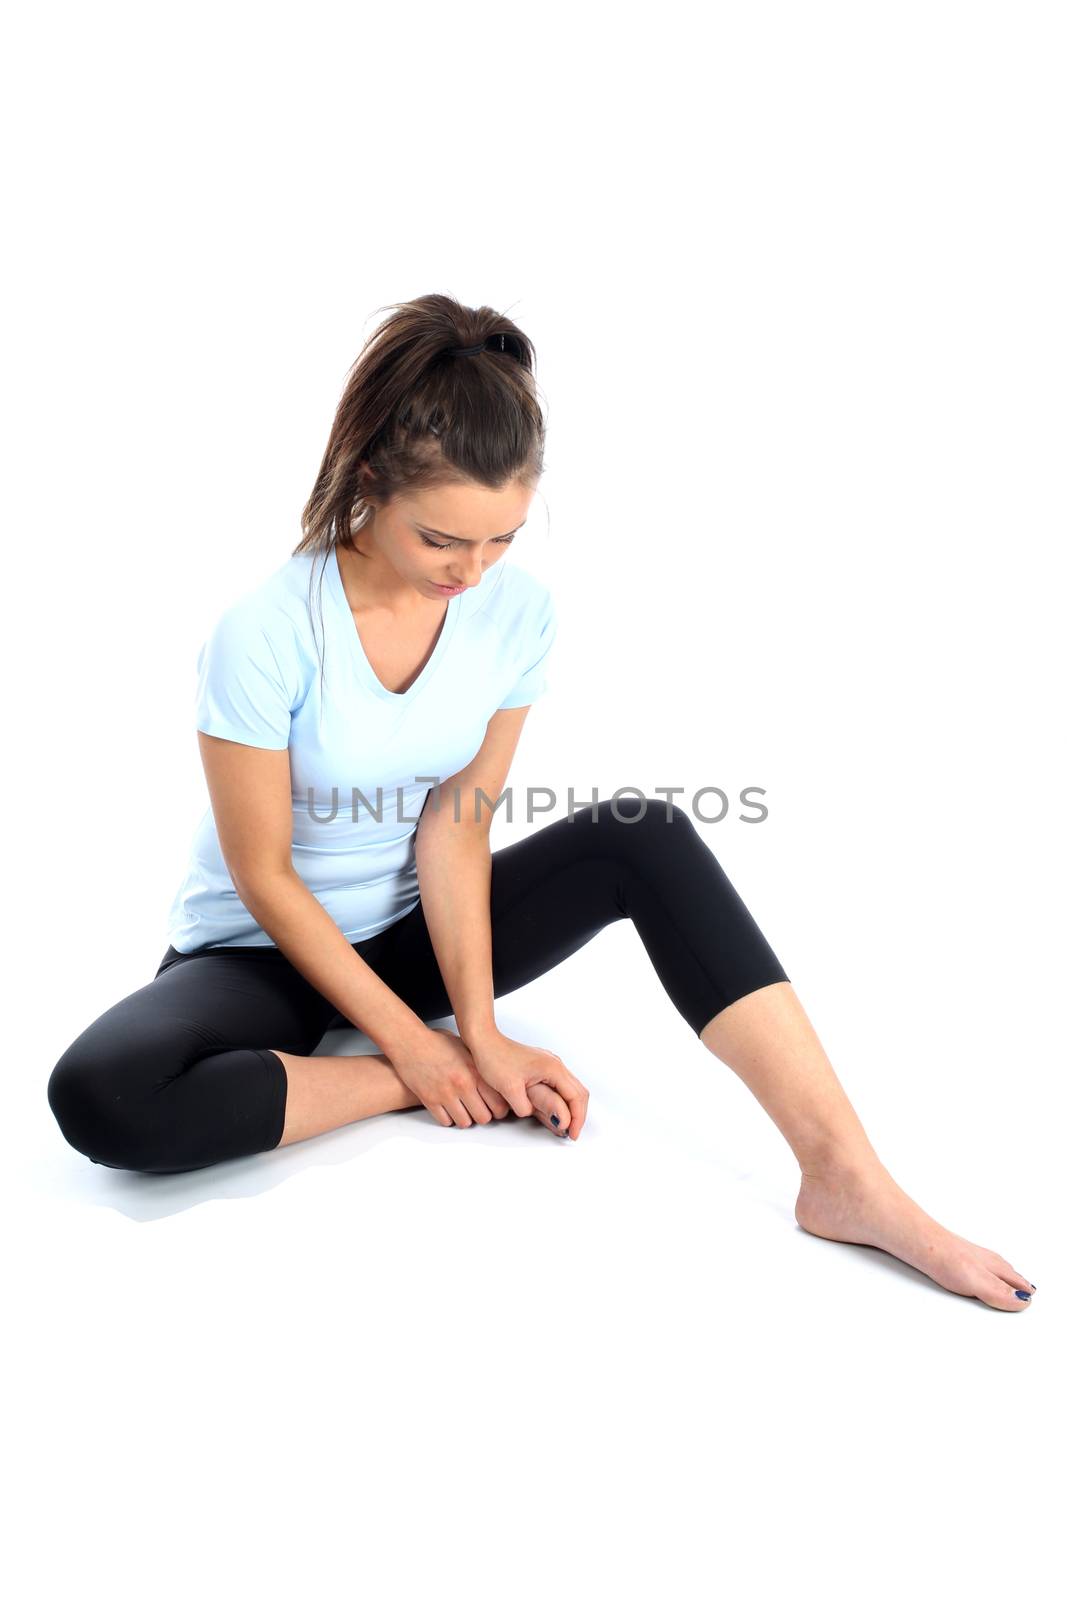 Model Released. Woman With Ankle Sports Injury by Whiteboxmedia